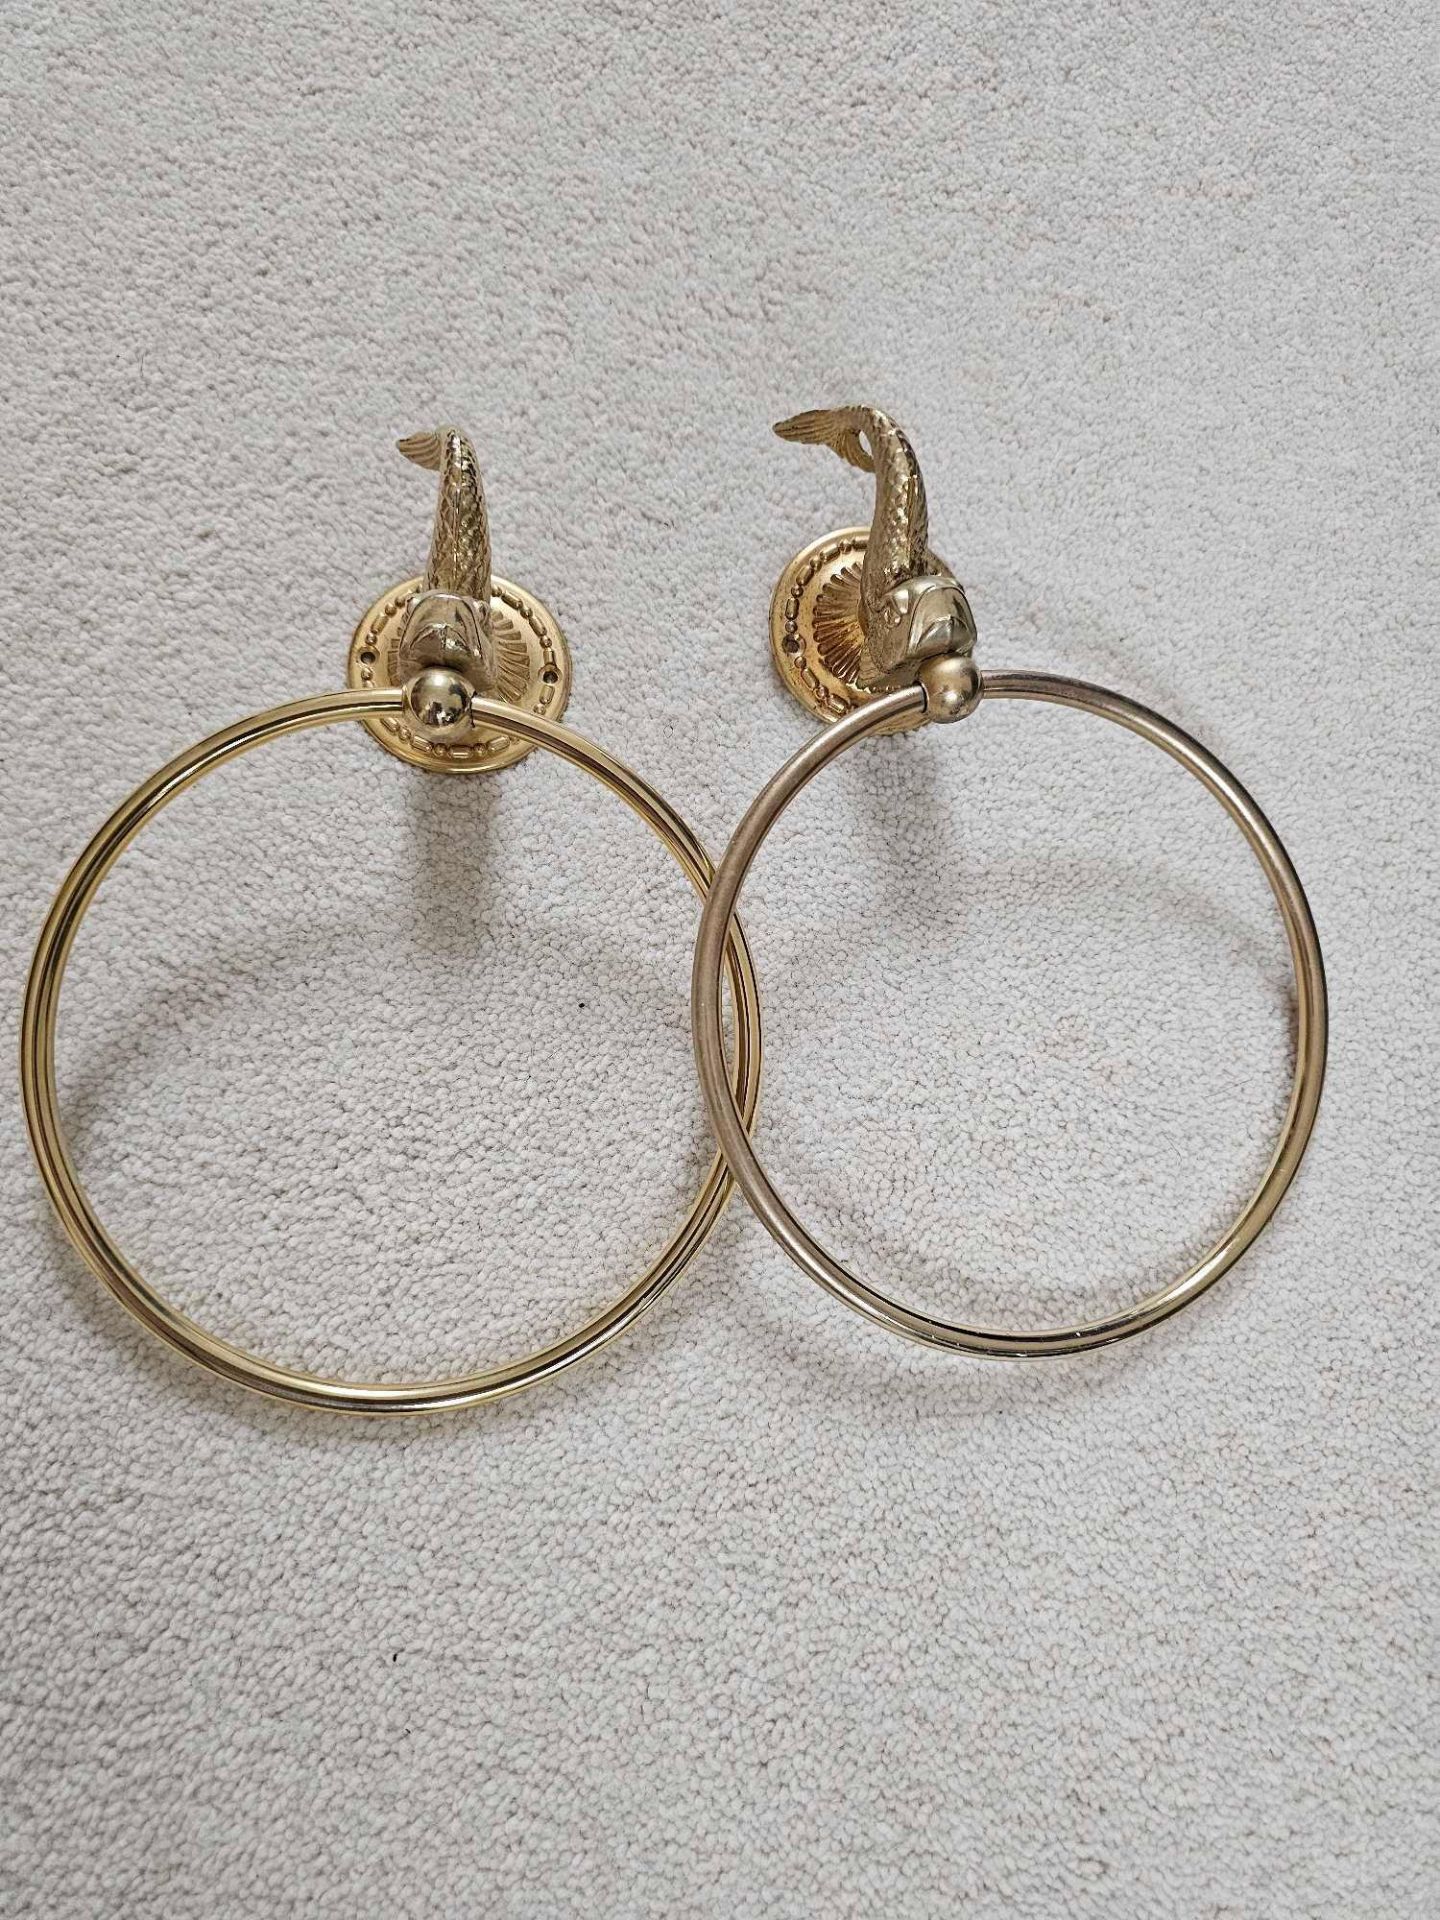 2 X Brass Towel Rings With Dolphin Form Mounts